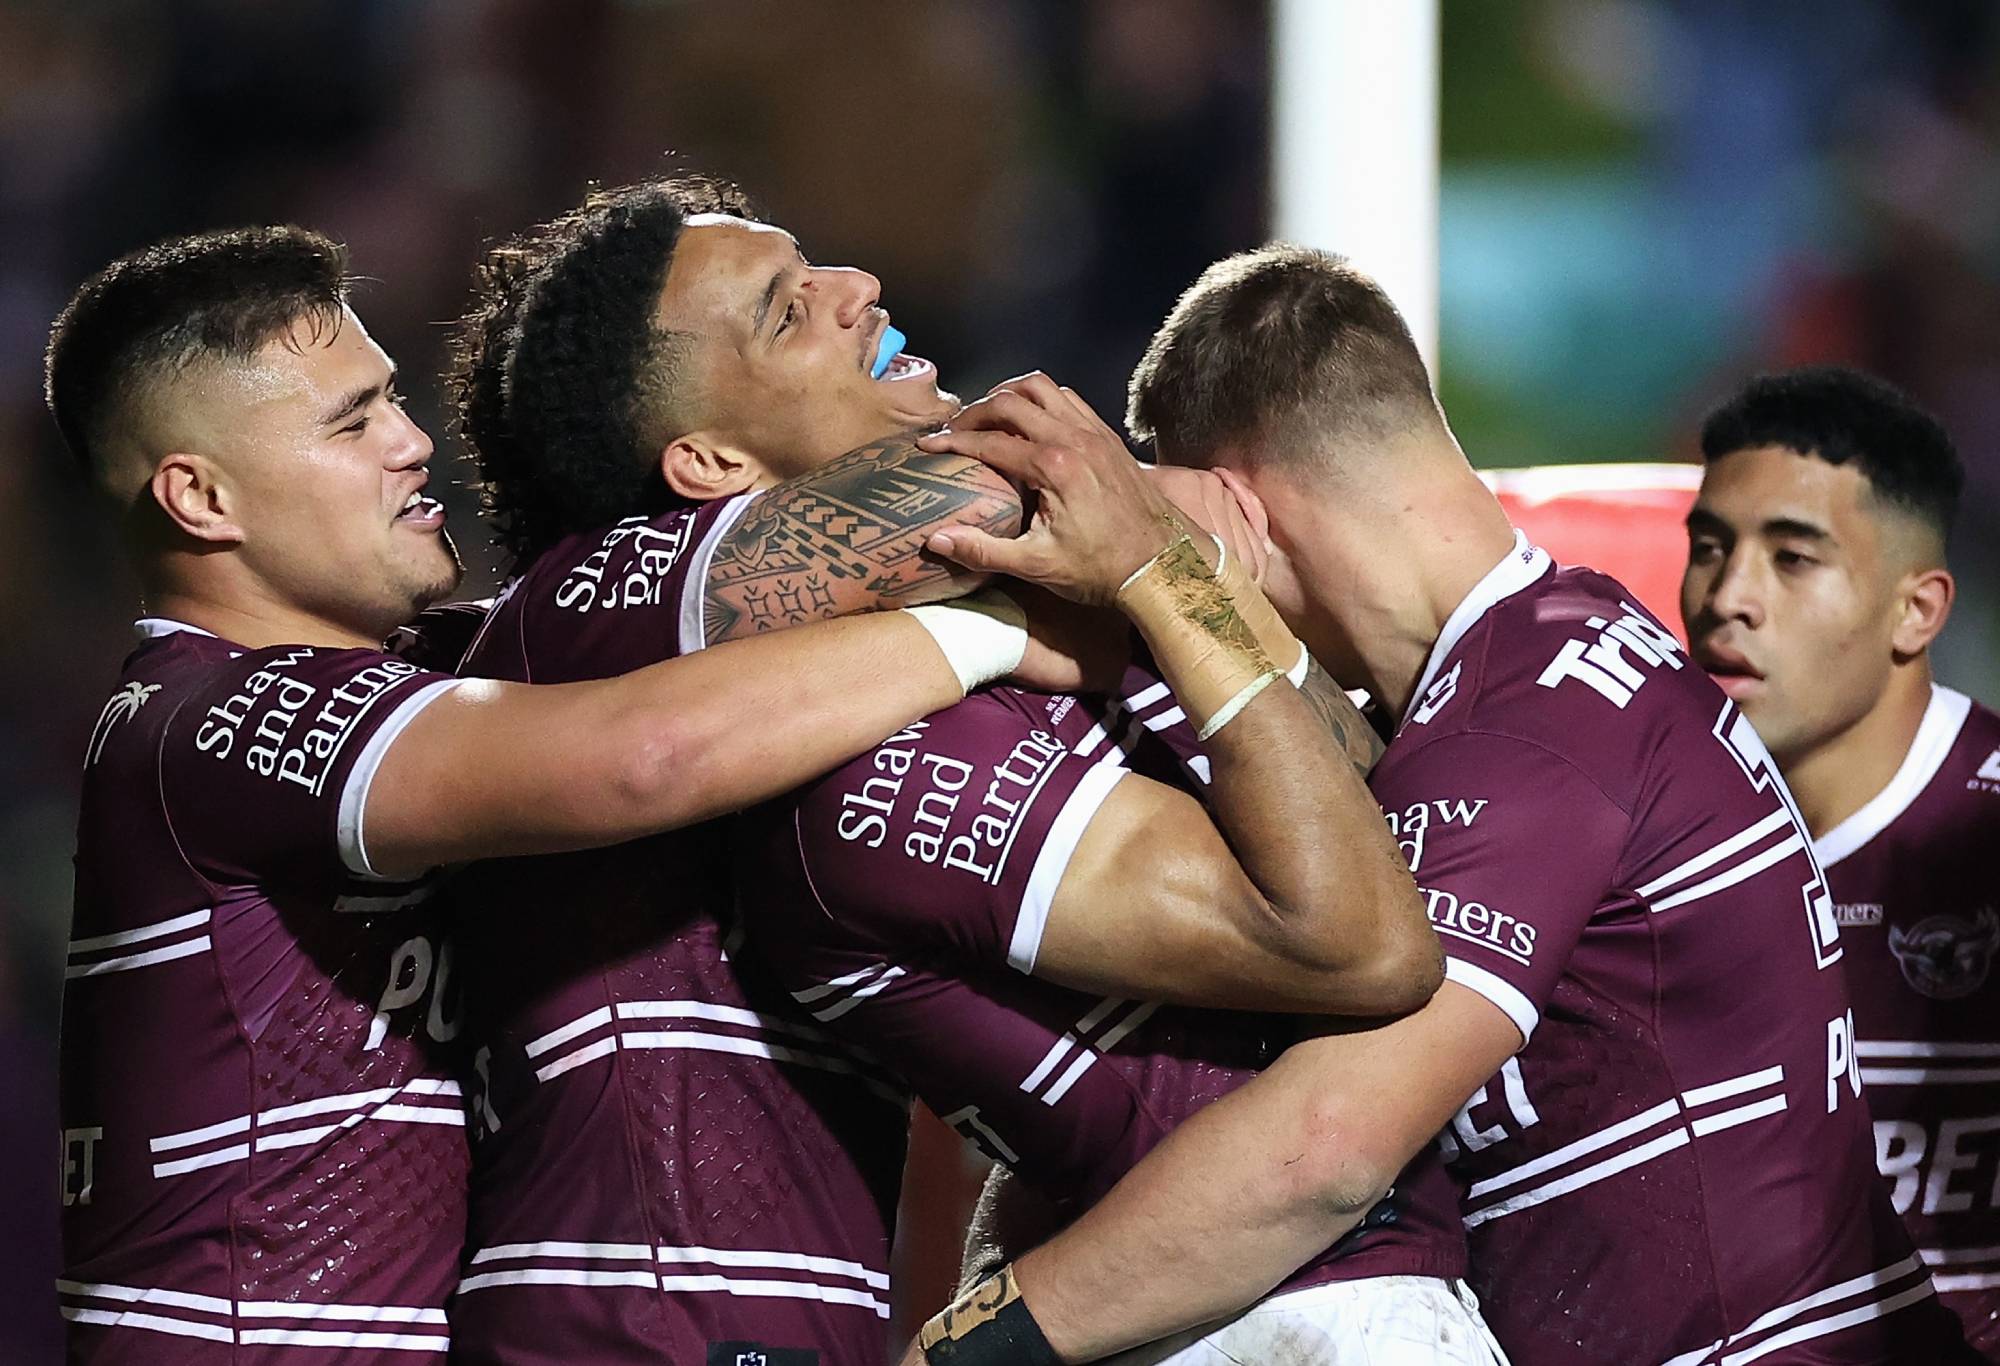 SYDNEY, AUSTRALIA - JUNE 04: Jason Saab of the Sea Eagles celebrates scoring a try with team mates during the round 13 NRL match between the Manly Sea Eagles and the New Zealand Warriors at 4 Pines Park, on June 04, 2022, in Sydney, Australia. (Photo by Cameron Spencer/Getty Images)